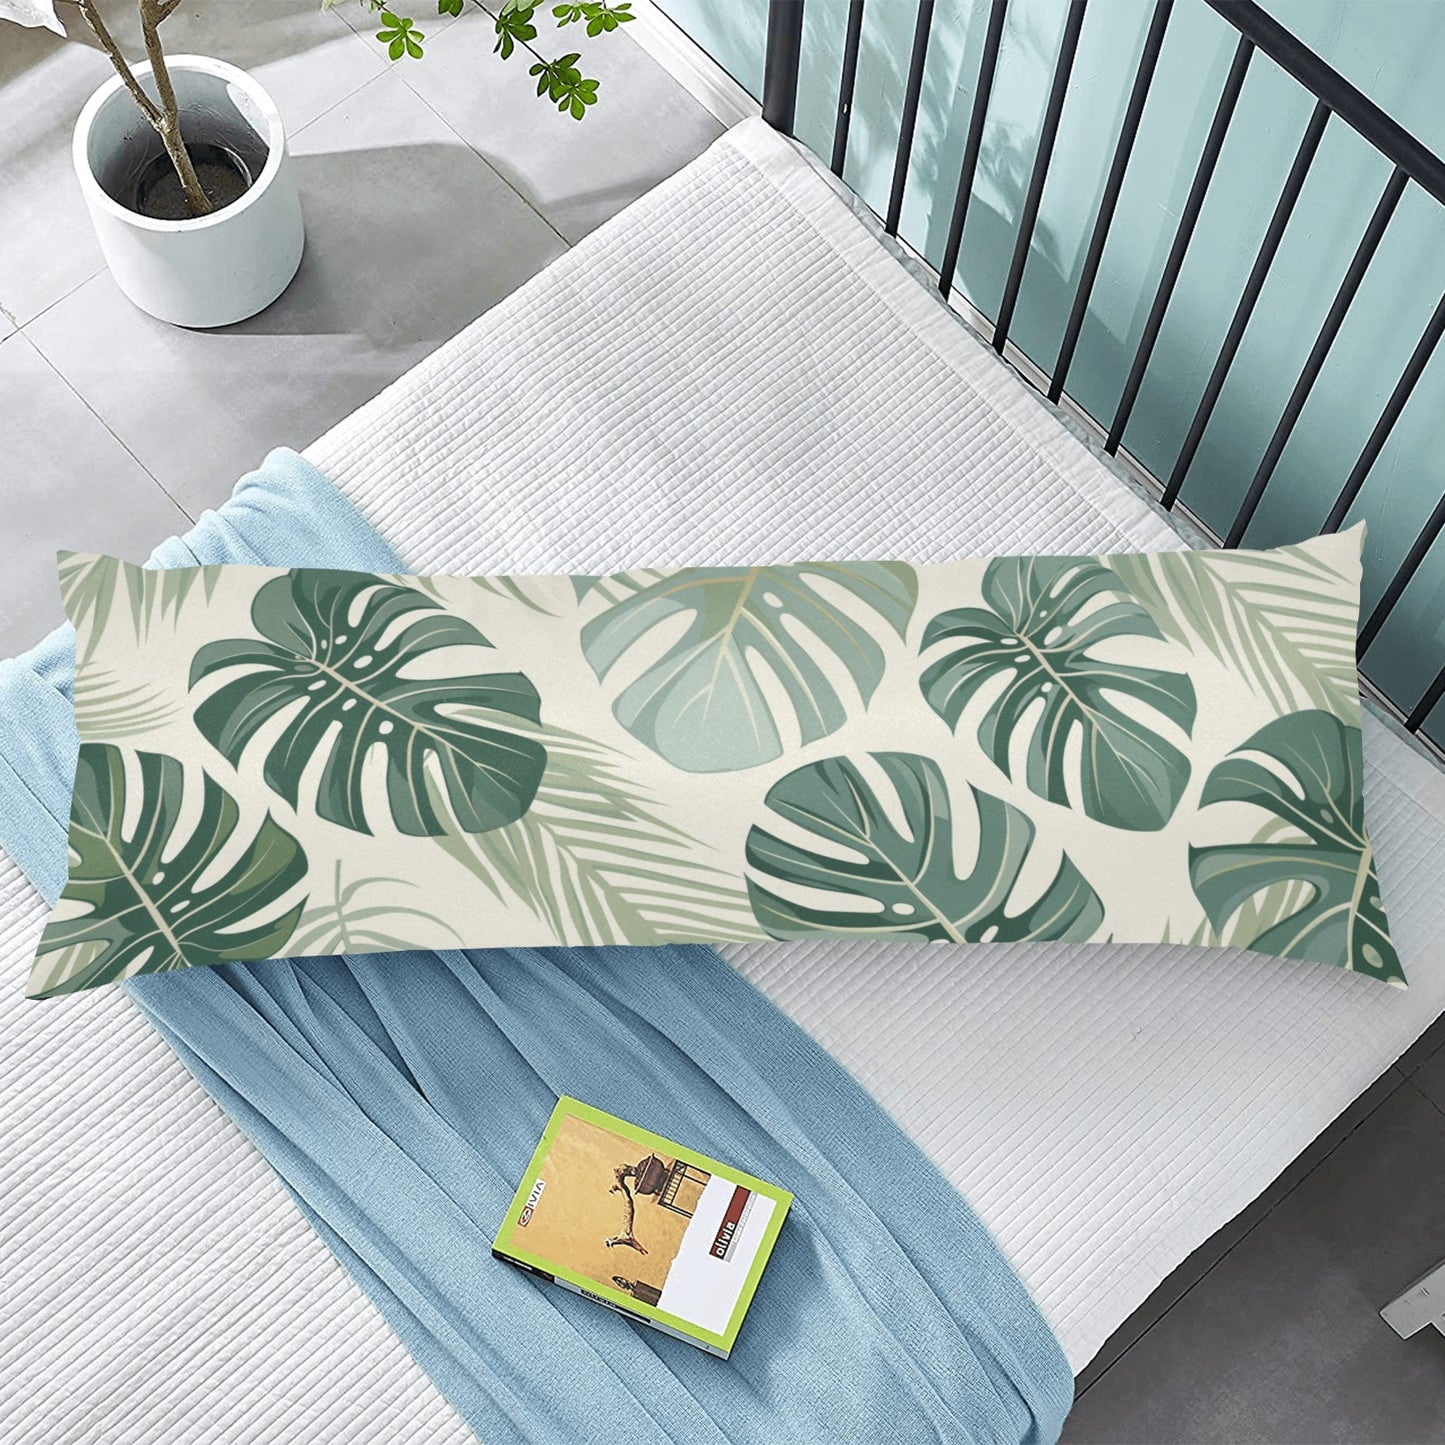 Monstera Leaf Body Pillow Case, Sage Green Tropical Retro Long Large Bed Accent Print Throw Decor Decorative Cover Cushion 20x54